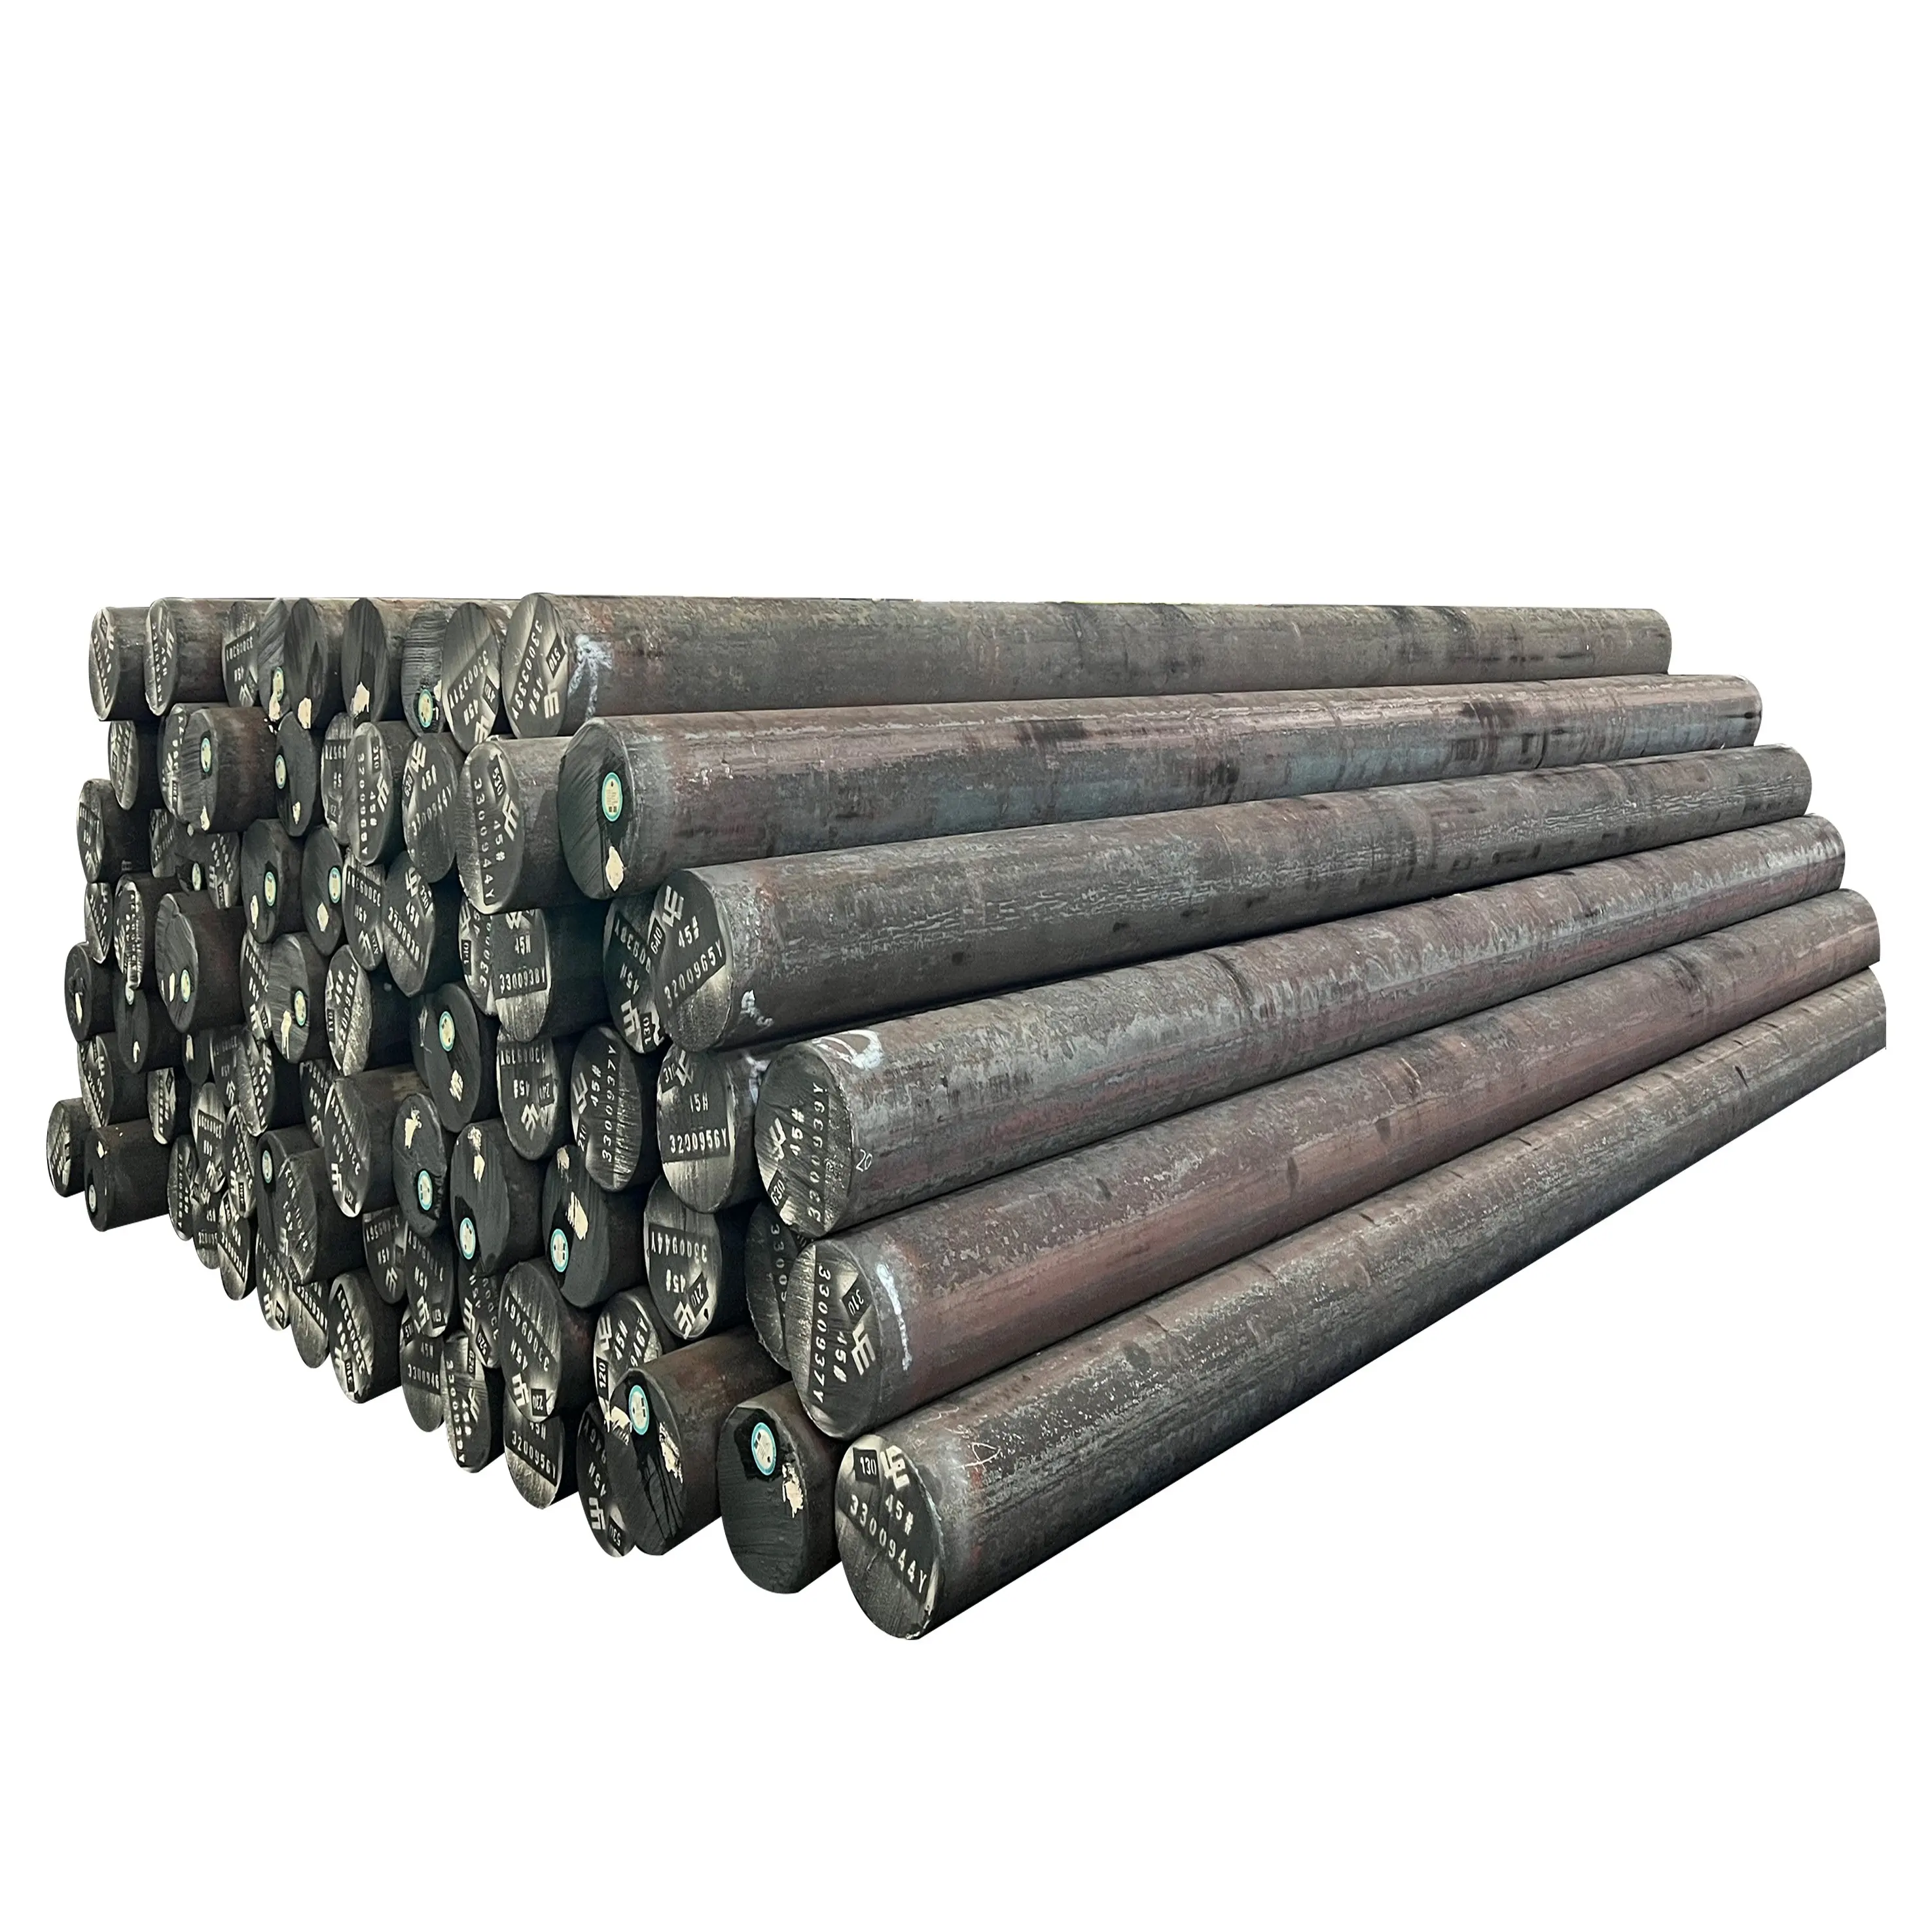 Large Diameter Hot Rolled Round Steel Small Diameter Cold Drawn Bright Round Steel Rod